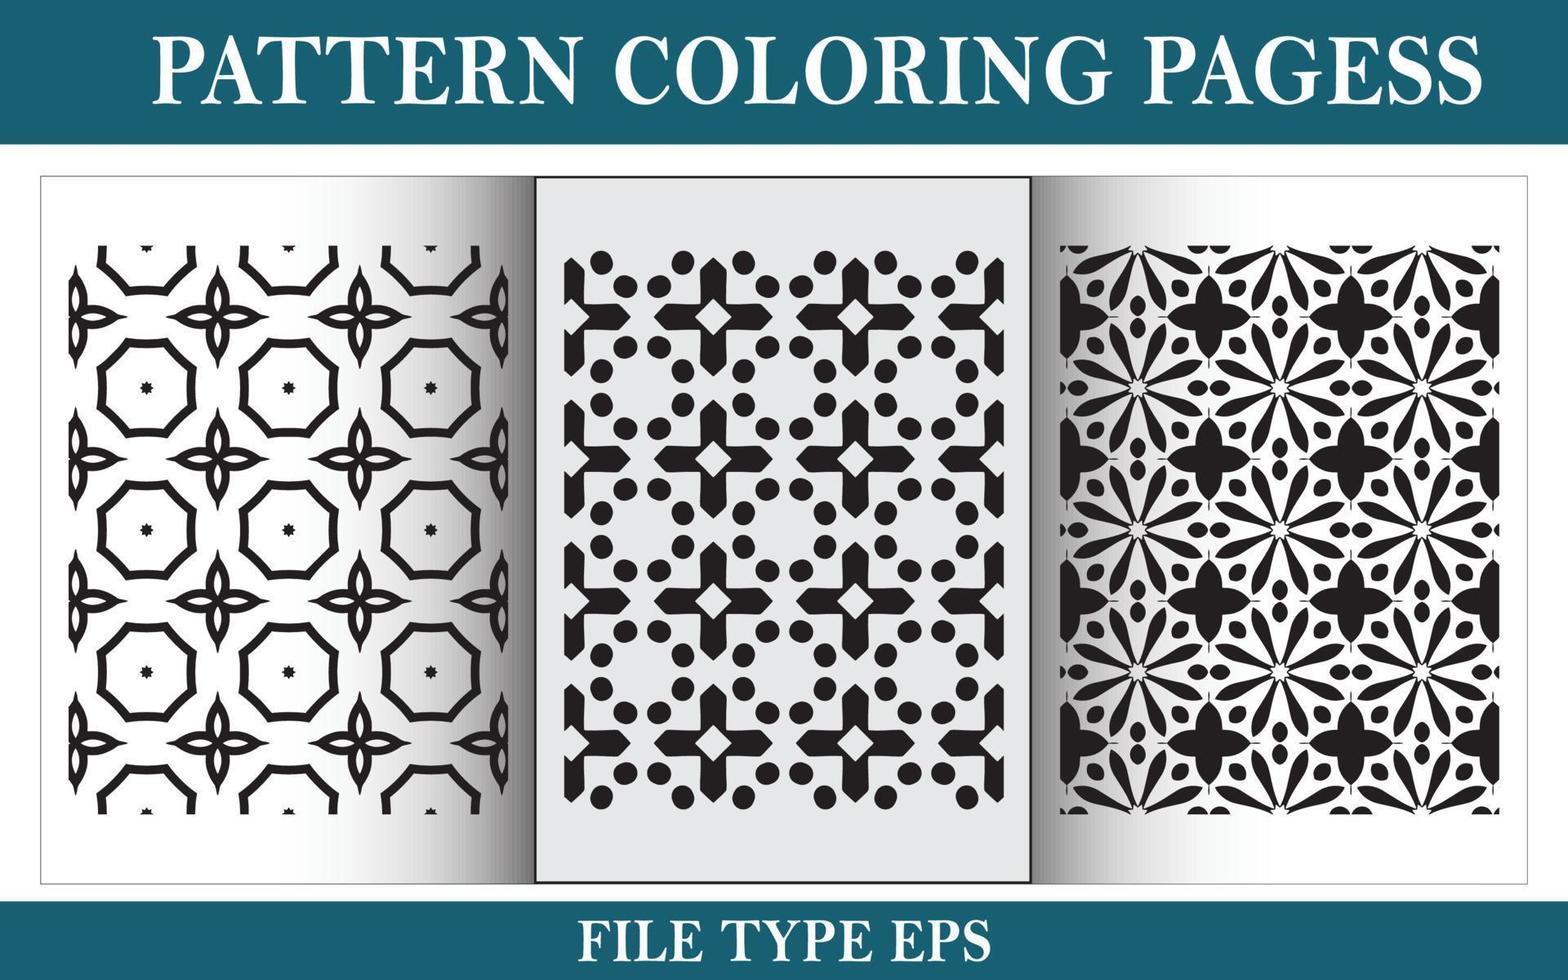 Pattern floral coloring page black and white vector